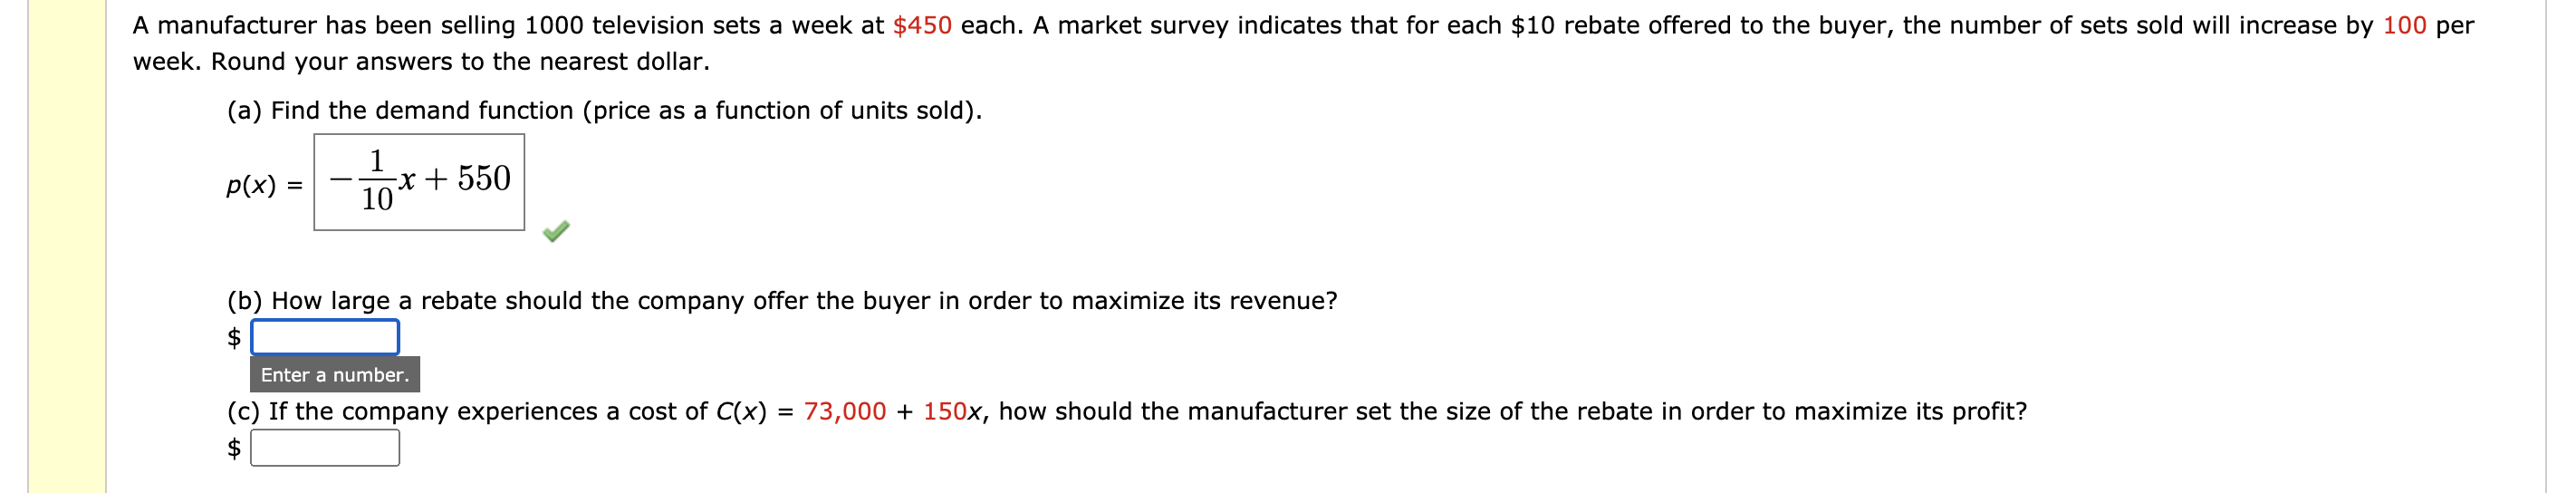 A manufacturer has been selling 1000 television sets a week at $450 each. A market survey indicates that for each $10 rebate offered to the buyer, the number of sets sold will increase by 100 per
week. Round your answers to the nearest dollar.
(a) Find the demand function (price as a function of units sold).
1
-x + 550
10
p(x)
(b) How large a rebate should the company offer the buyer in order to maximize its revenue?
Enter a number.
(c) If the company experiences a cost of C(x)
$
73,000 + 150x, how should the manufacturer set the size of the rebate in order to maximize its profit?
%3D
